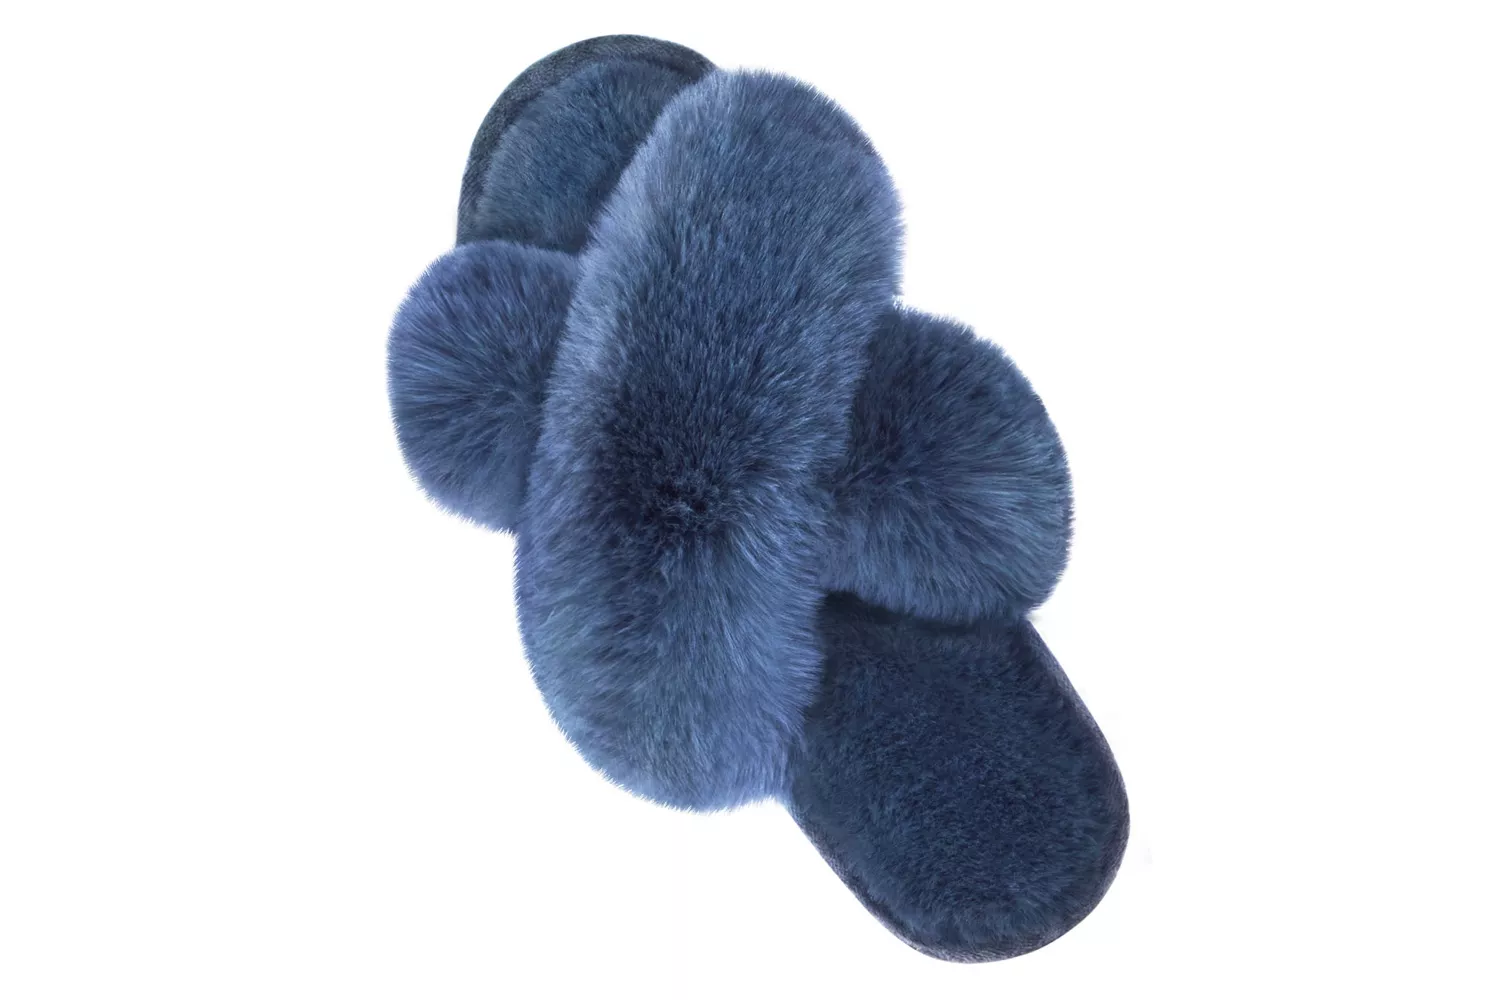 Parlovable Cross-Band Fuzzy Soft Slippers